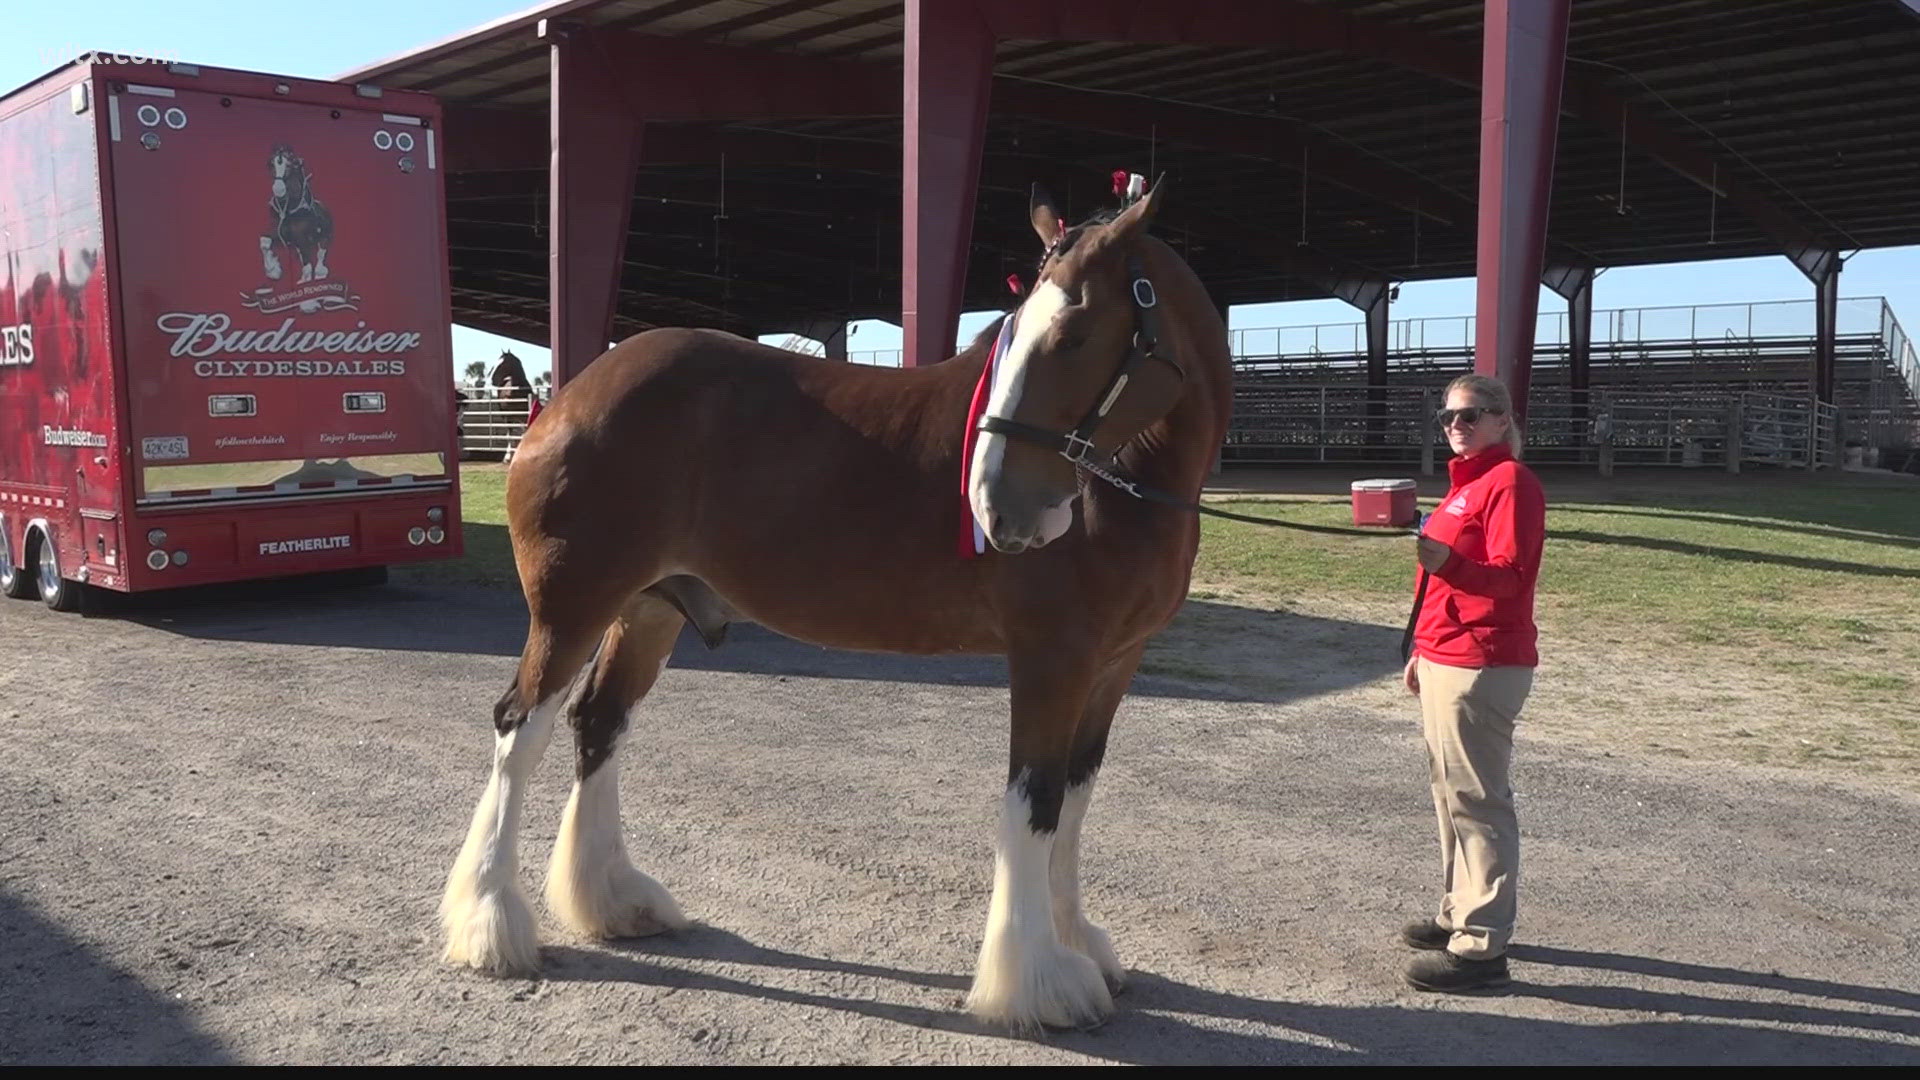 The Budweiser Clydesdales are in town to deliver some beer on Main Street in Lexington Thursday morning.